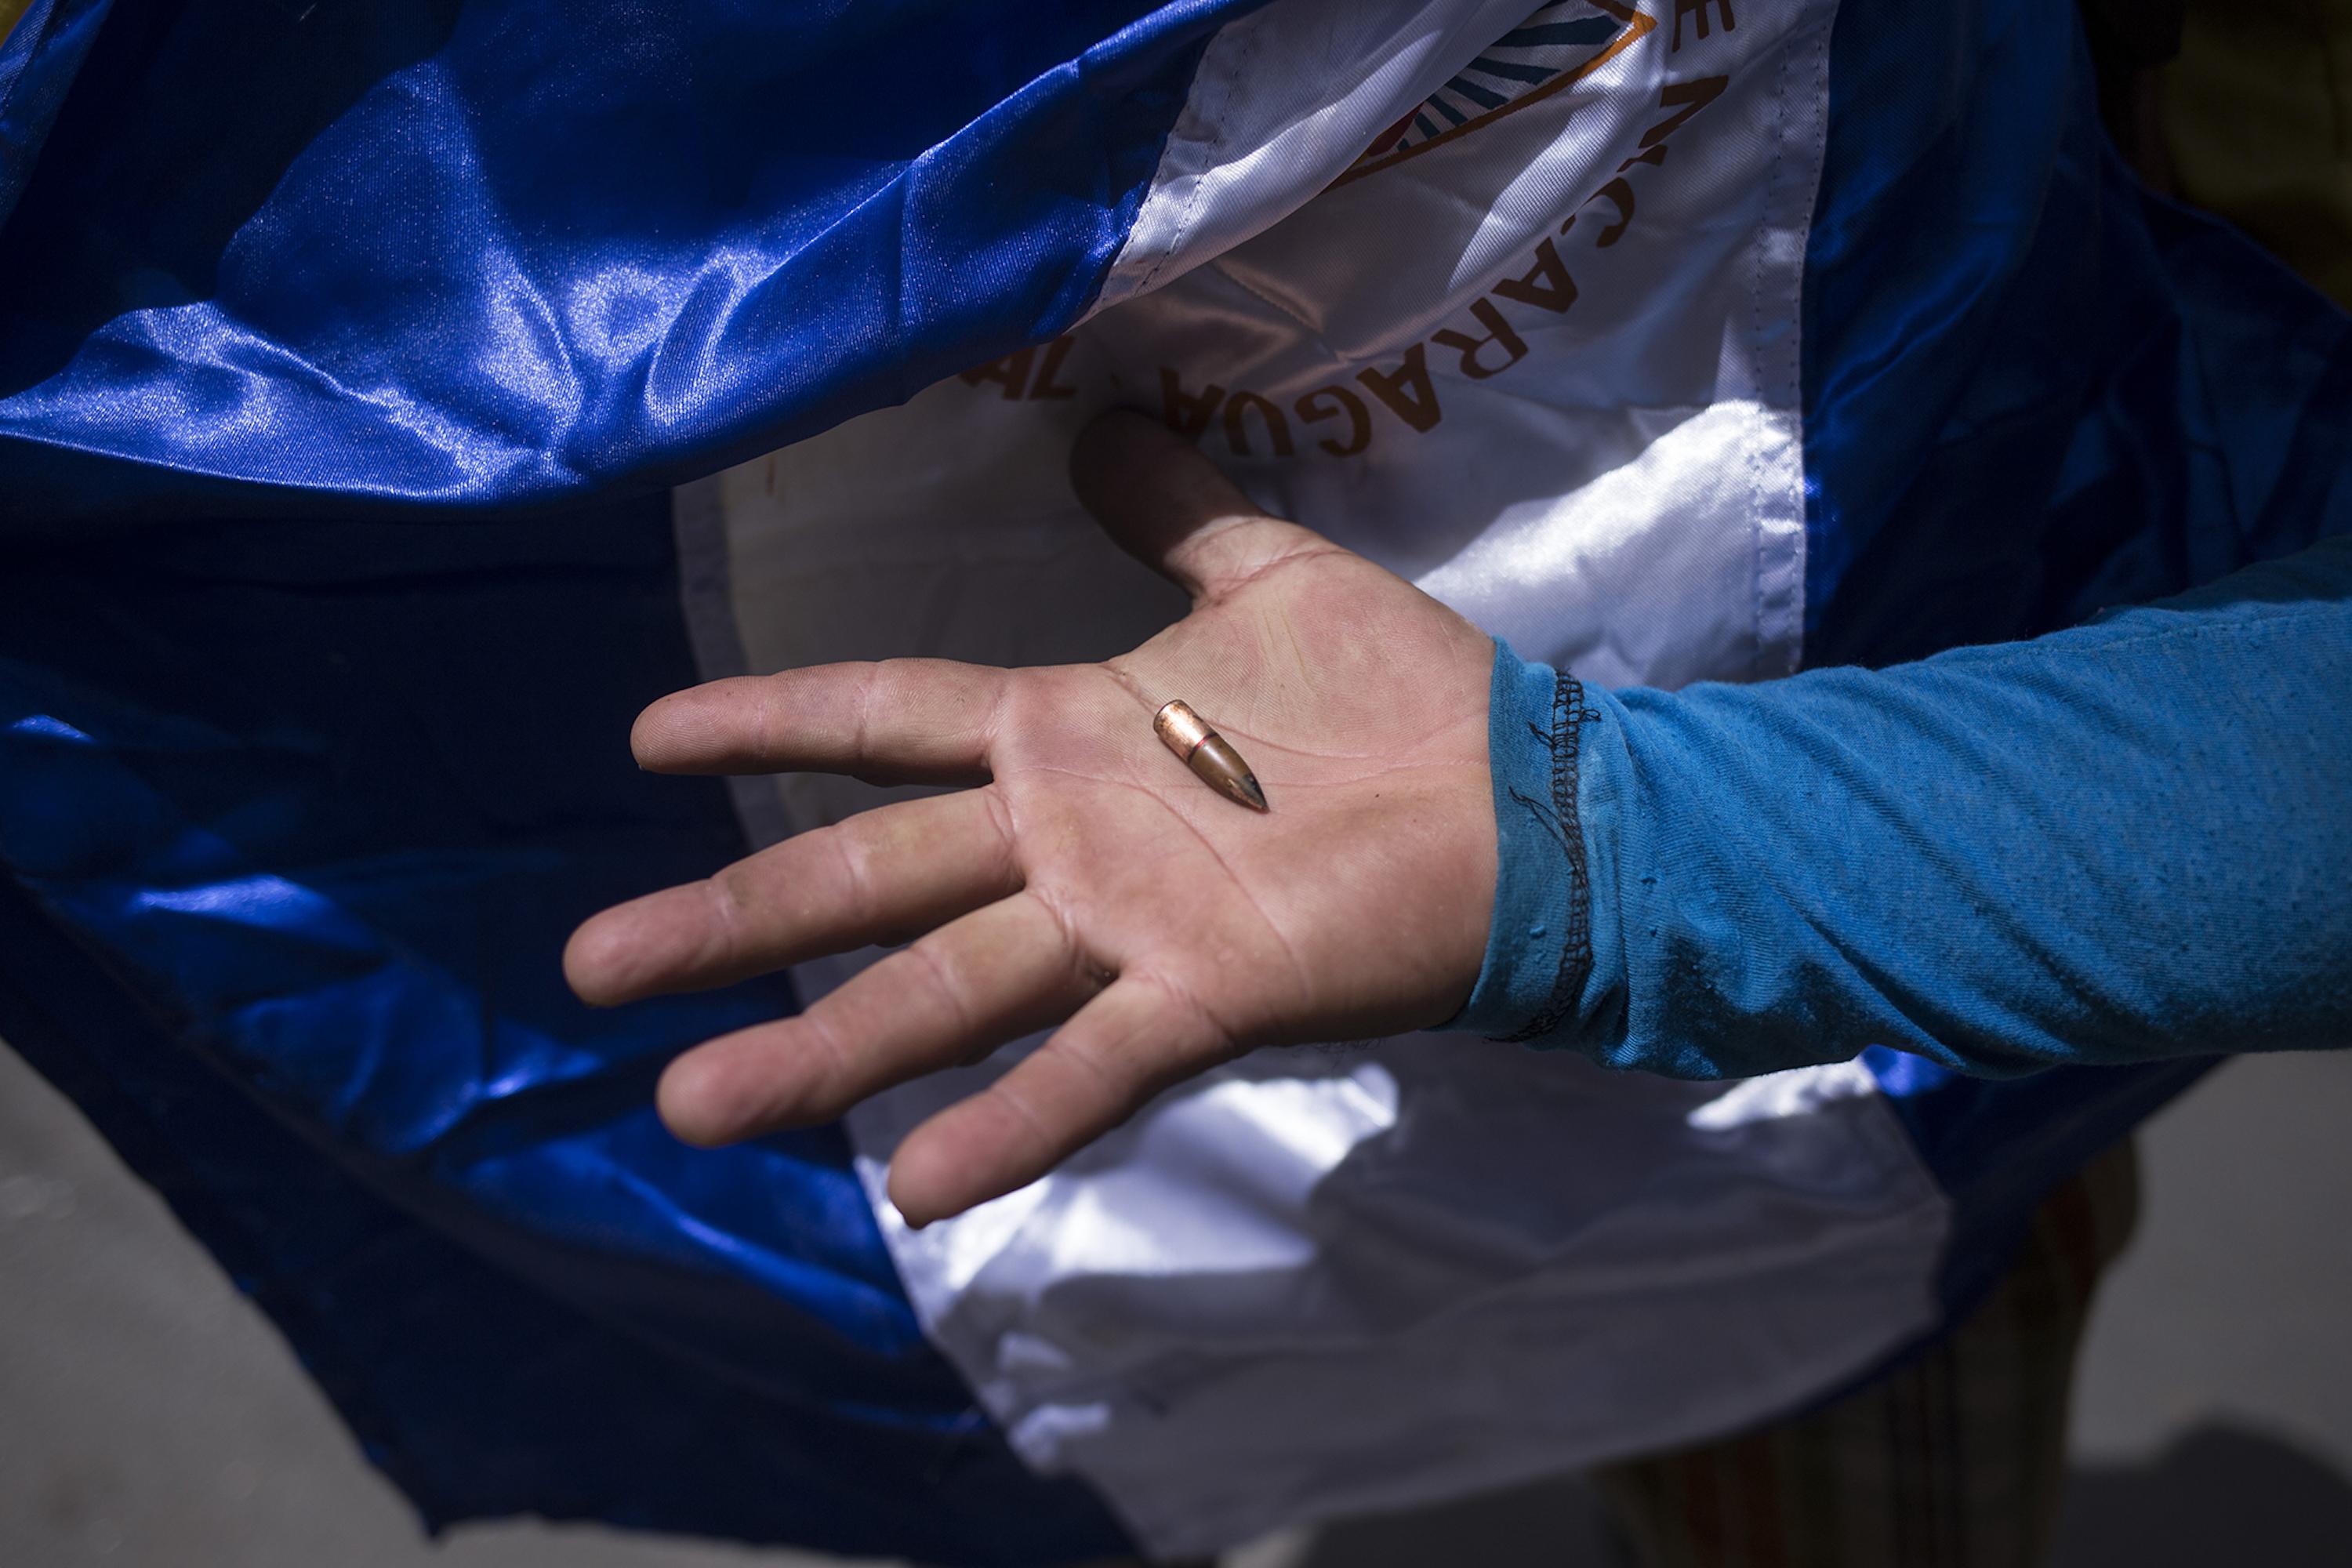 A demonstrator shows a bullet from an MP5, a sub-machine gun used by Nicaraguan police to attack protestors in Masaya on June 2, 2018. International organizations and journalists reported during the mass protests that government forces often shot to kill. Photo: Víctor Peña/El Faro